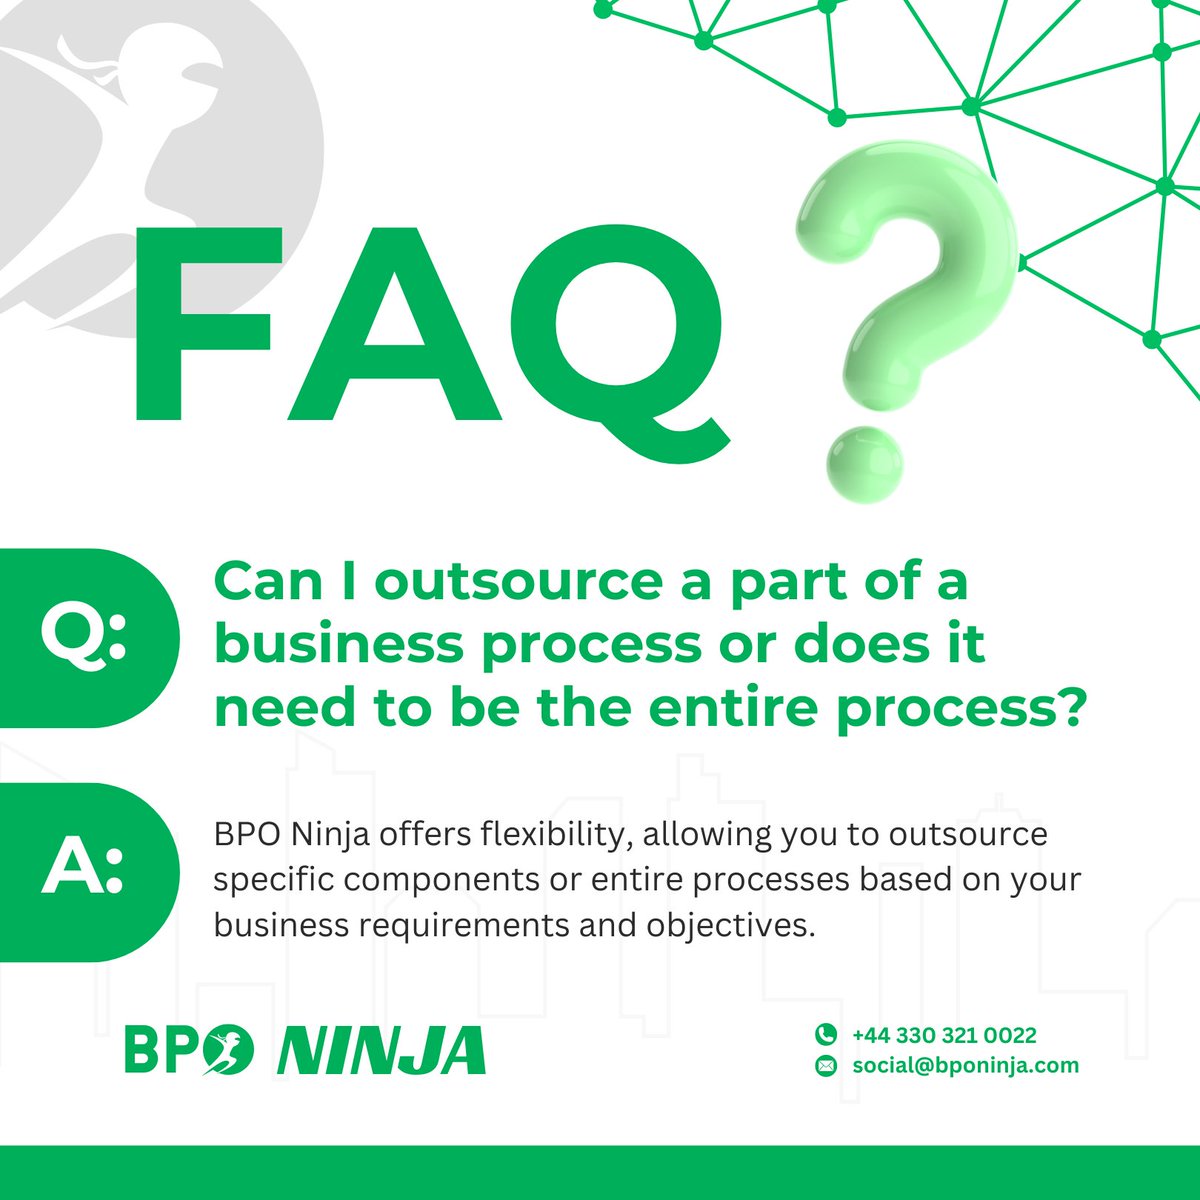 Get the answer to this common query and explore the flexibility BPO Ninja offers. 

Contact us:
P: +44 330 321 0022
E: social@bponija.com
W: eu1.hubs.ly/H08T43Q0

#BPO #BusinessProcessOutsourcing #Outsourcing #CostCutting #UKBusiness #PhilippineOutsourcing #BPOExcellence